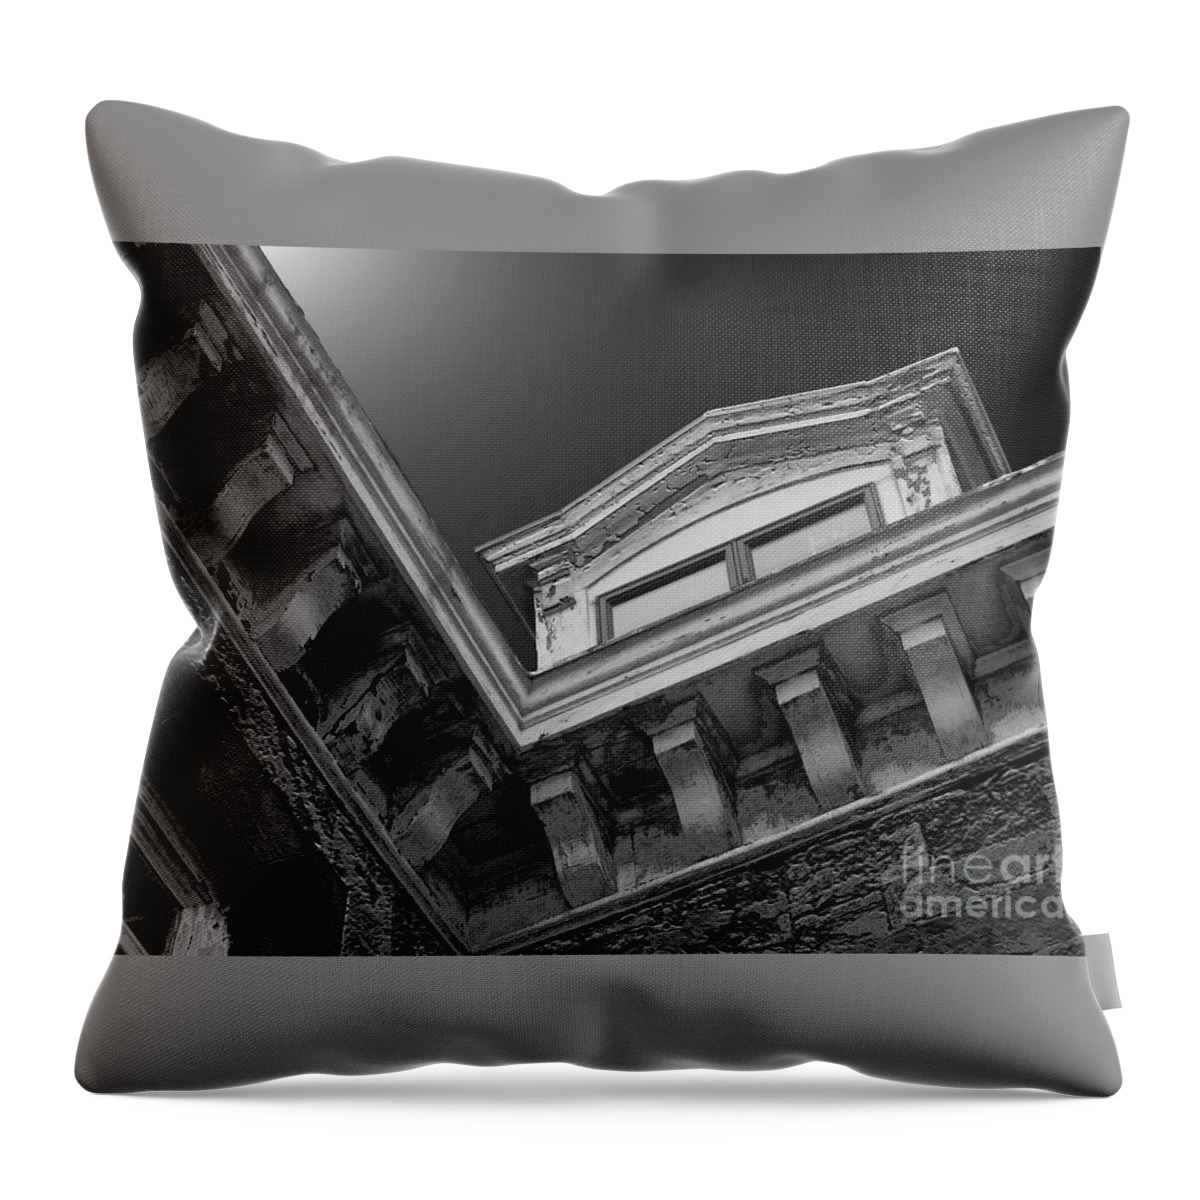 Architecture Throw Pillow featuring the photograph The Attic by Amaryllis Leon